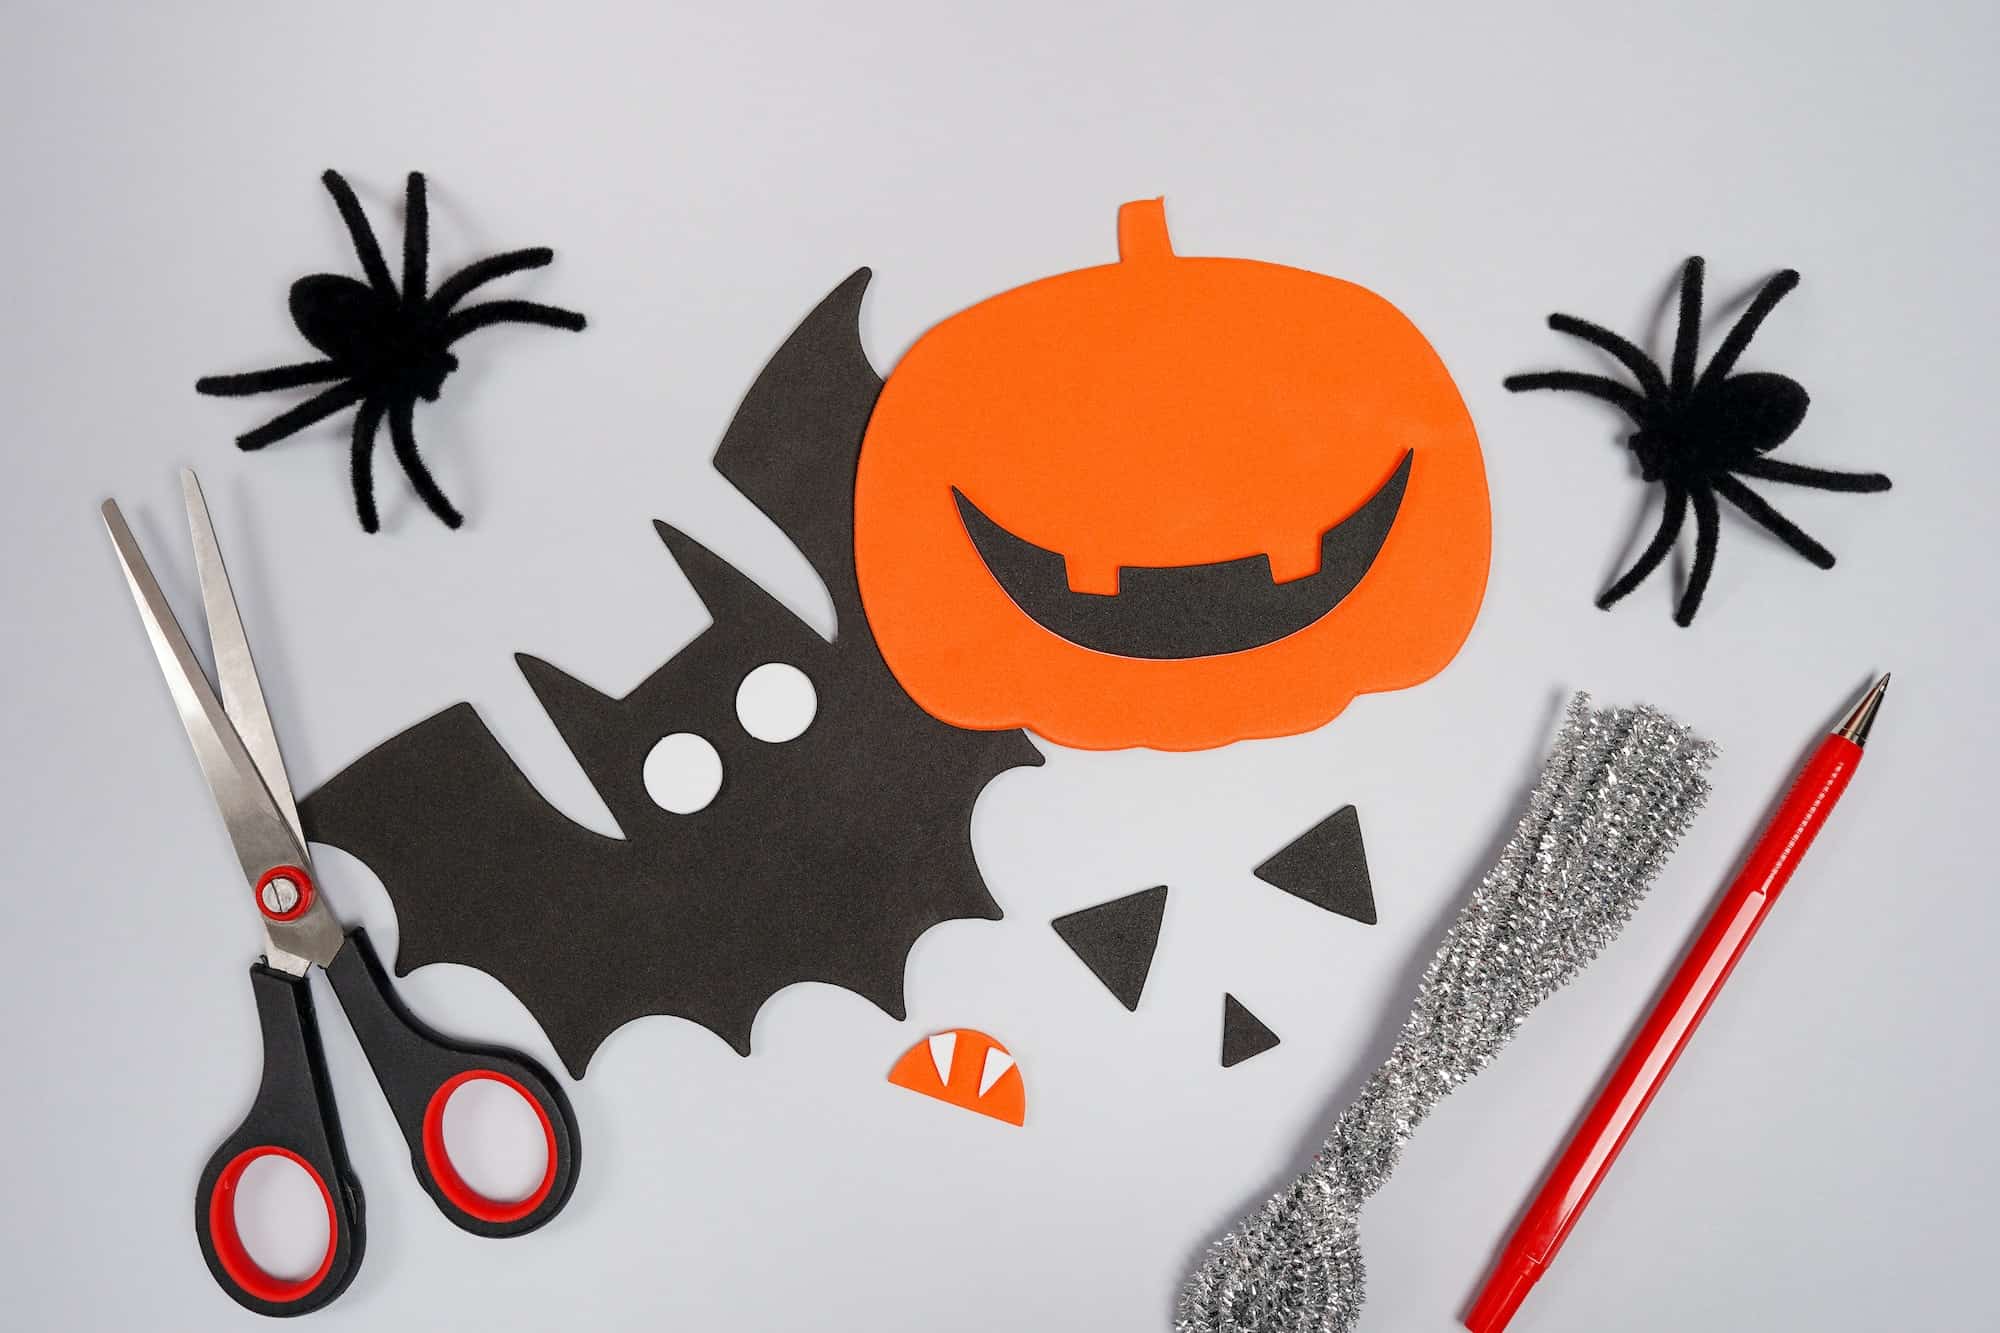 Halloween craft for kids. Materials for creativity of orange, and black colors